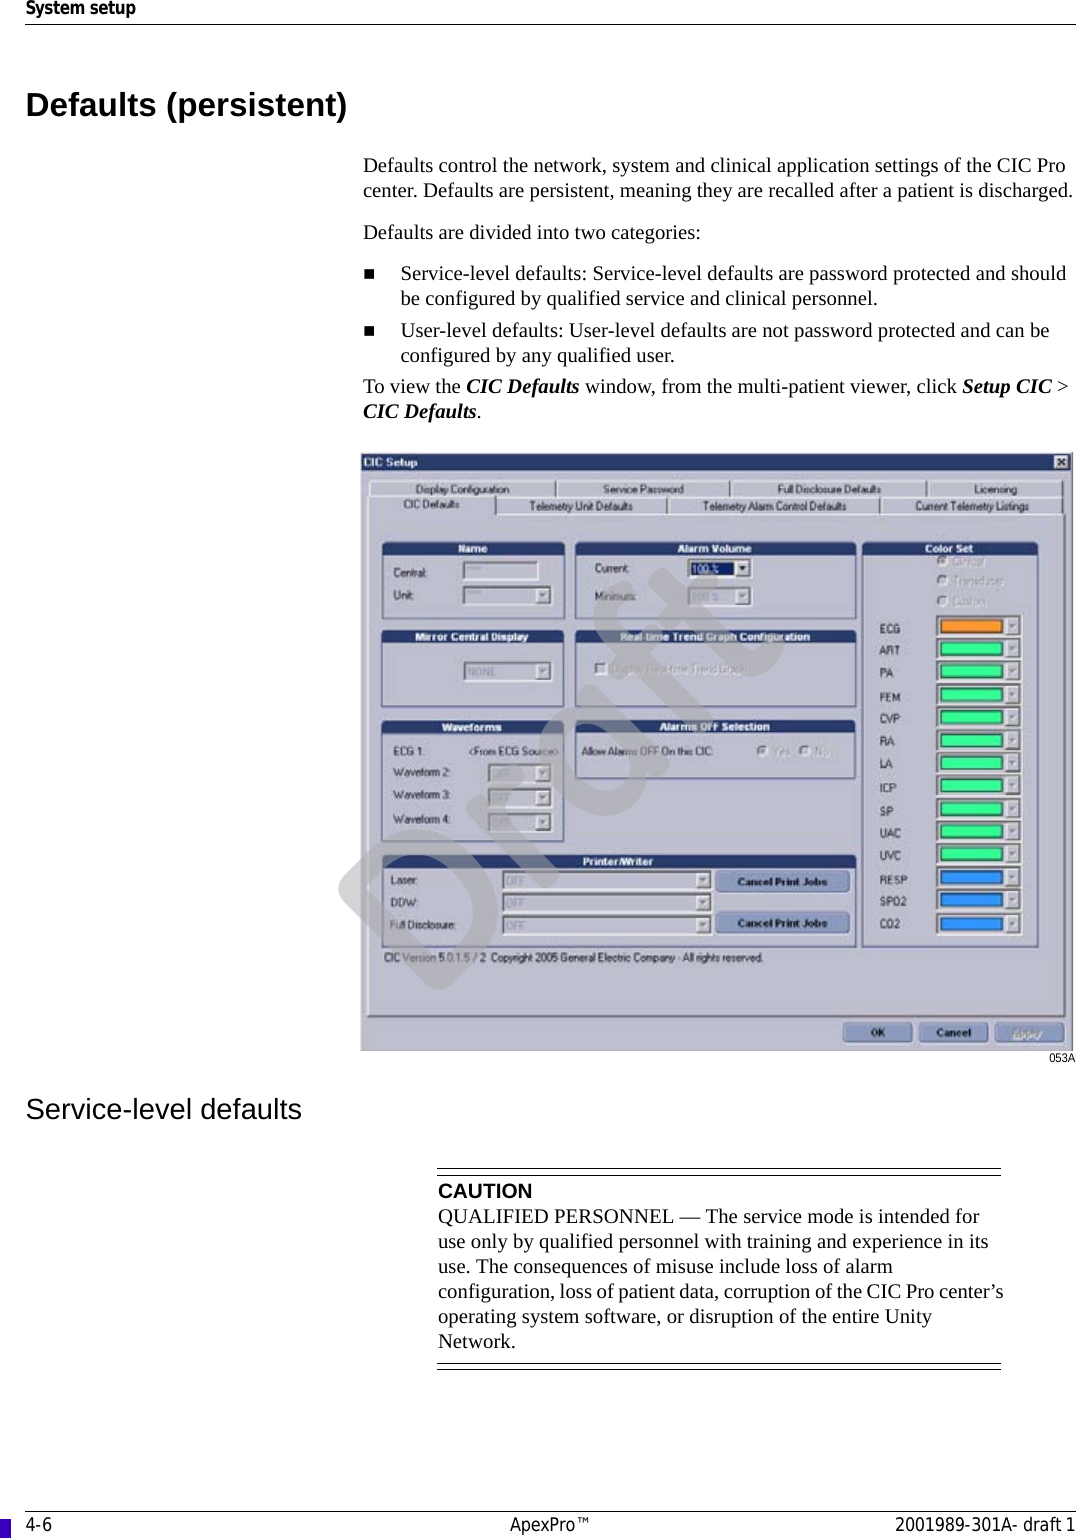 4-6 ApexPro™ 2001989-301A- draft 1System setupDefaults (persistent)Defaults control the network, system and clinical application settings of the CIC Pro center. Defaults are persistent, meaning they are recalled after a patient is discharged.Defaults are divided into two categories:Service-level defaults: Service-level defaults are password protected and should be configured by qualified service and clinical personnel.User-level defaults: User-level defaults are not password protected and can be configured by any qualified user.To view the CIC Defaults window, from the multi-patient viewer, click Setup CIC &gt; CIC Defaults.053AService-level defaultsCAUTIONQUALIFIED PERSONNEL — The service mode is intended for use only by qualified personnel with training and experience in its use. The consequences of misuse include loss of alarm configuration, loss of patient data, corruption of the CIC Pro center’s operating system software, or disruption of the entire Unity Network.Draft